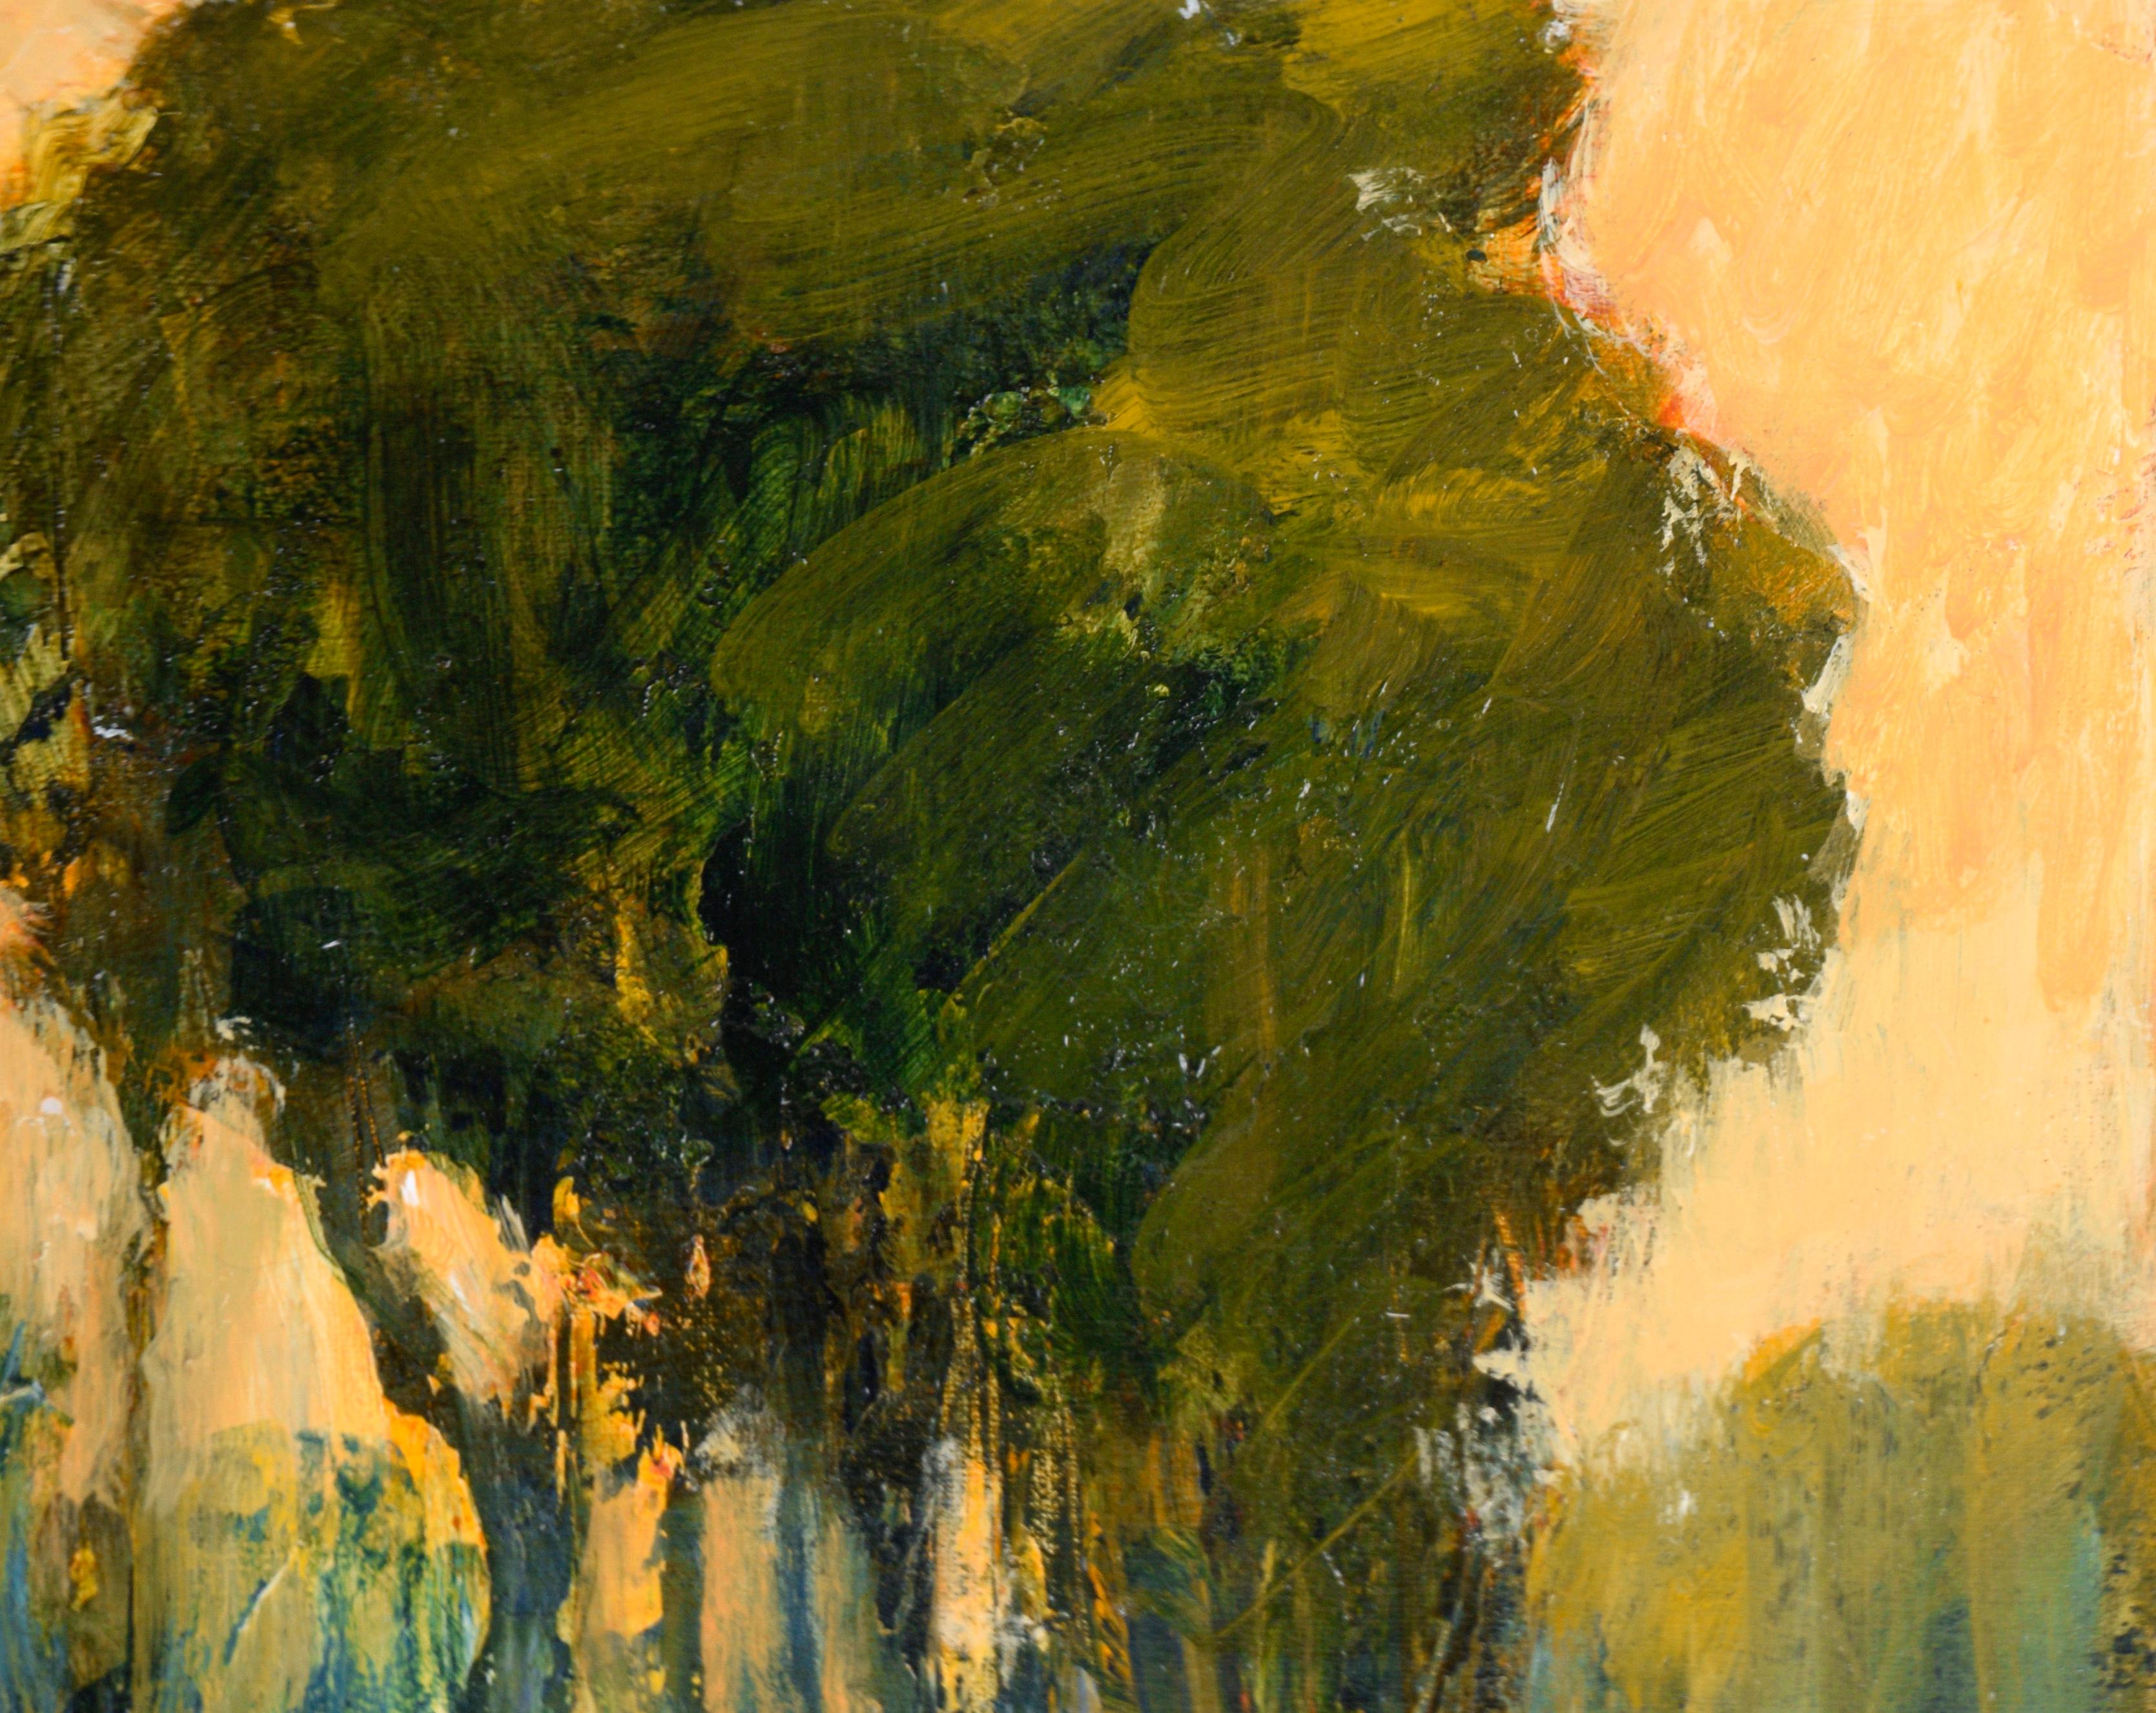 Trees by the Pond at Sunset - Landscape in Acrylic on Artist's Board - Contemporary Painting by Bobbi Doyle-Maher